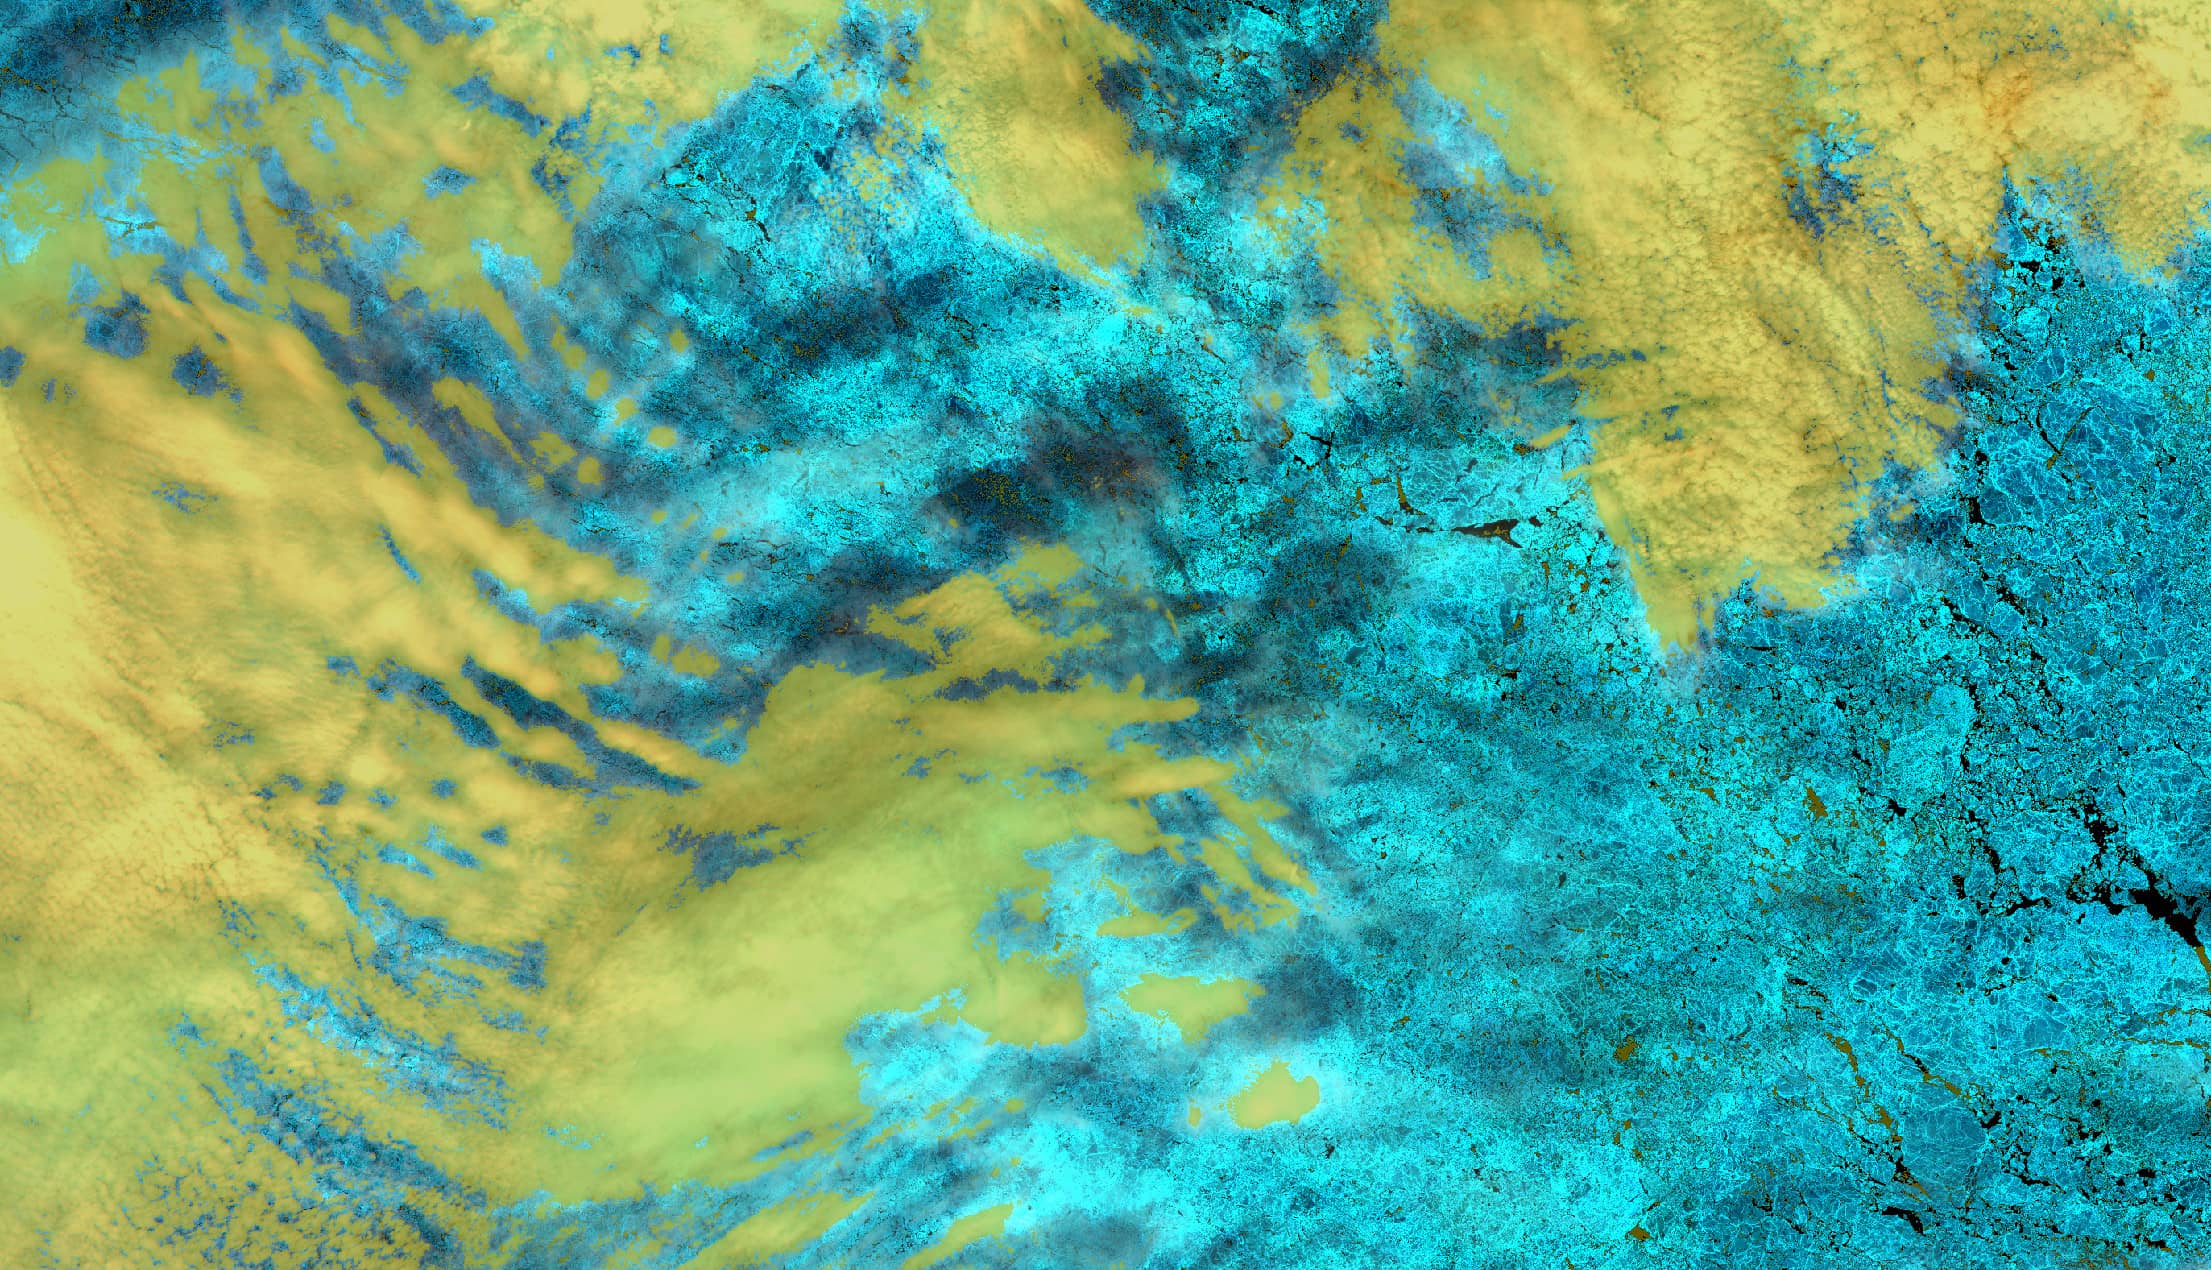 Sentinel-2 MSI false colour image showing semi-transparent clouds (marked yellow) casting shadows over sea ice (appearing blue) in the Kara Sea. Discrimination between clouds and ice- or snow-covered surface is a classic problem of cloud detection.